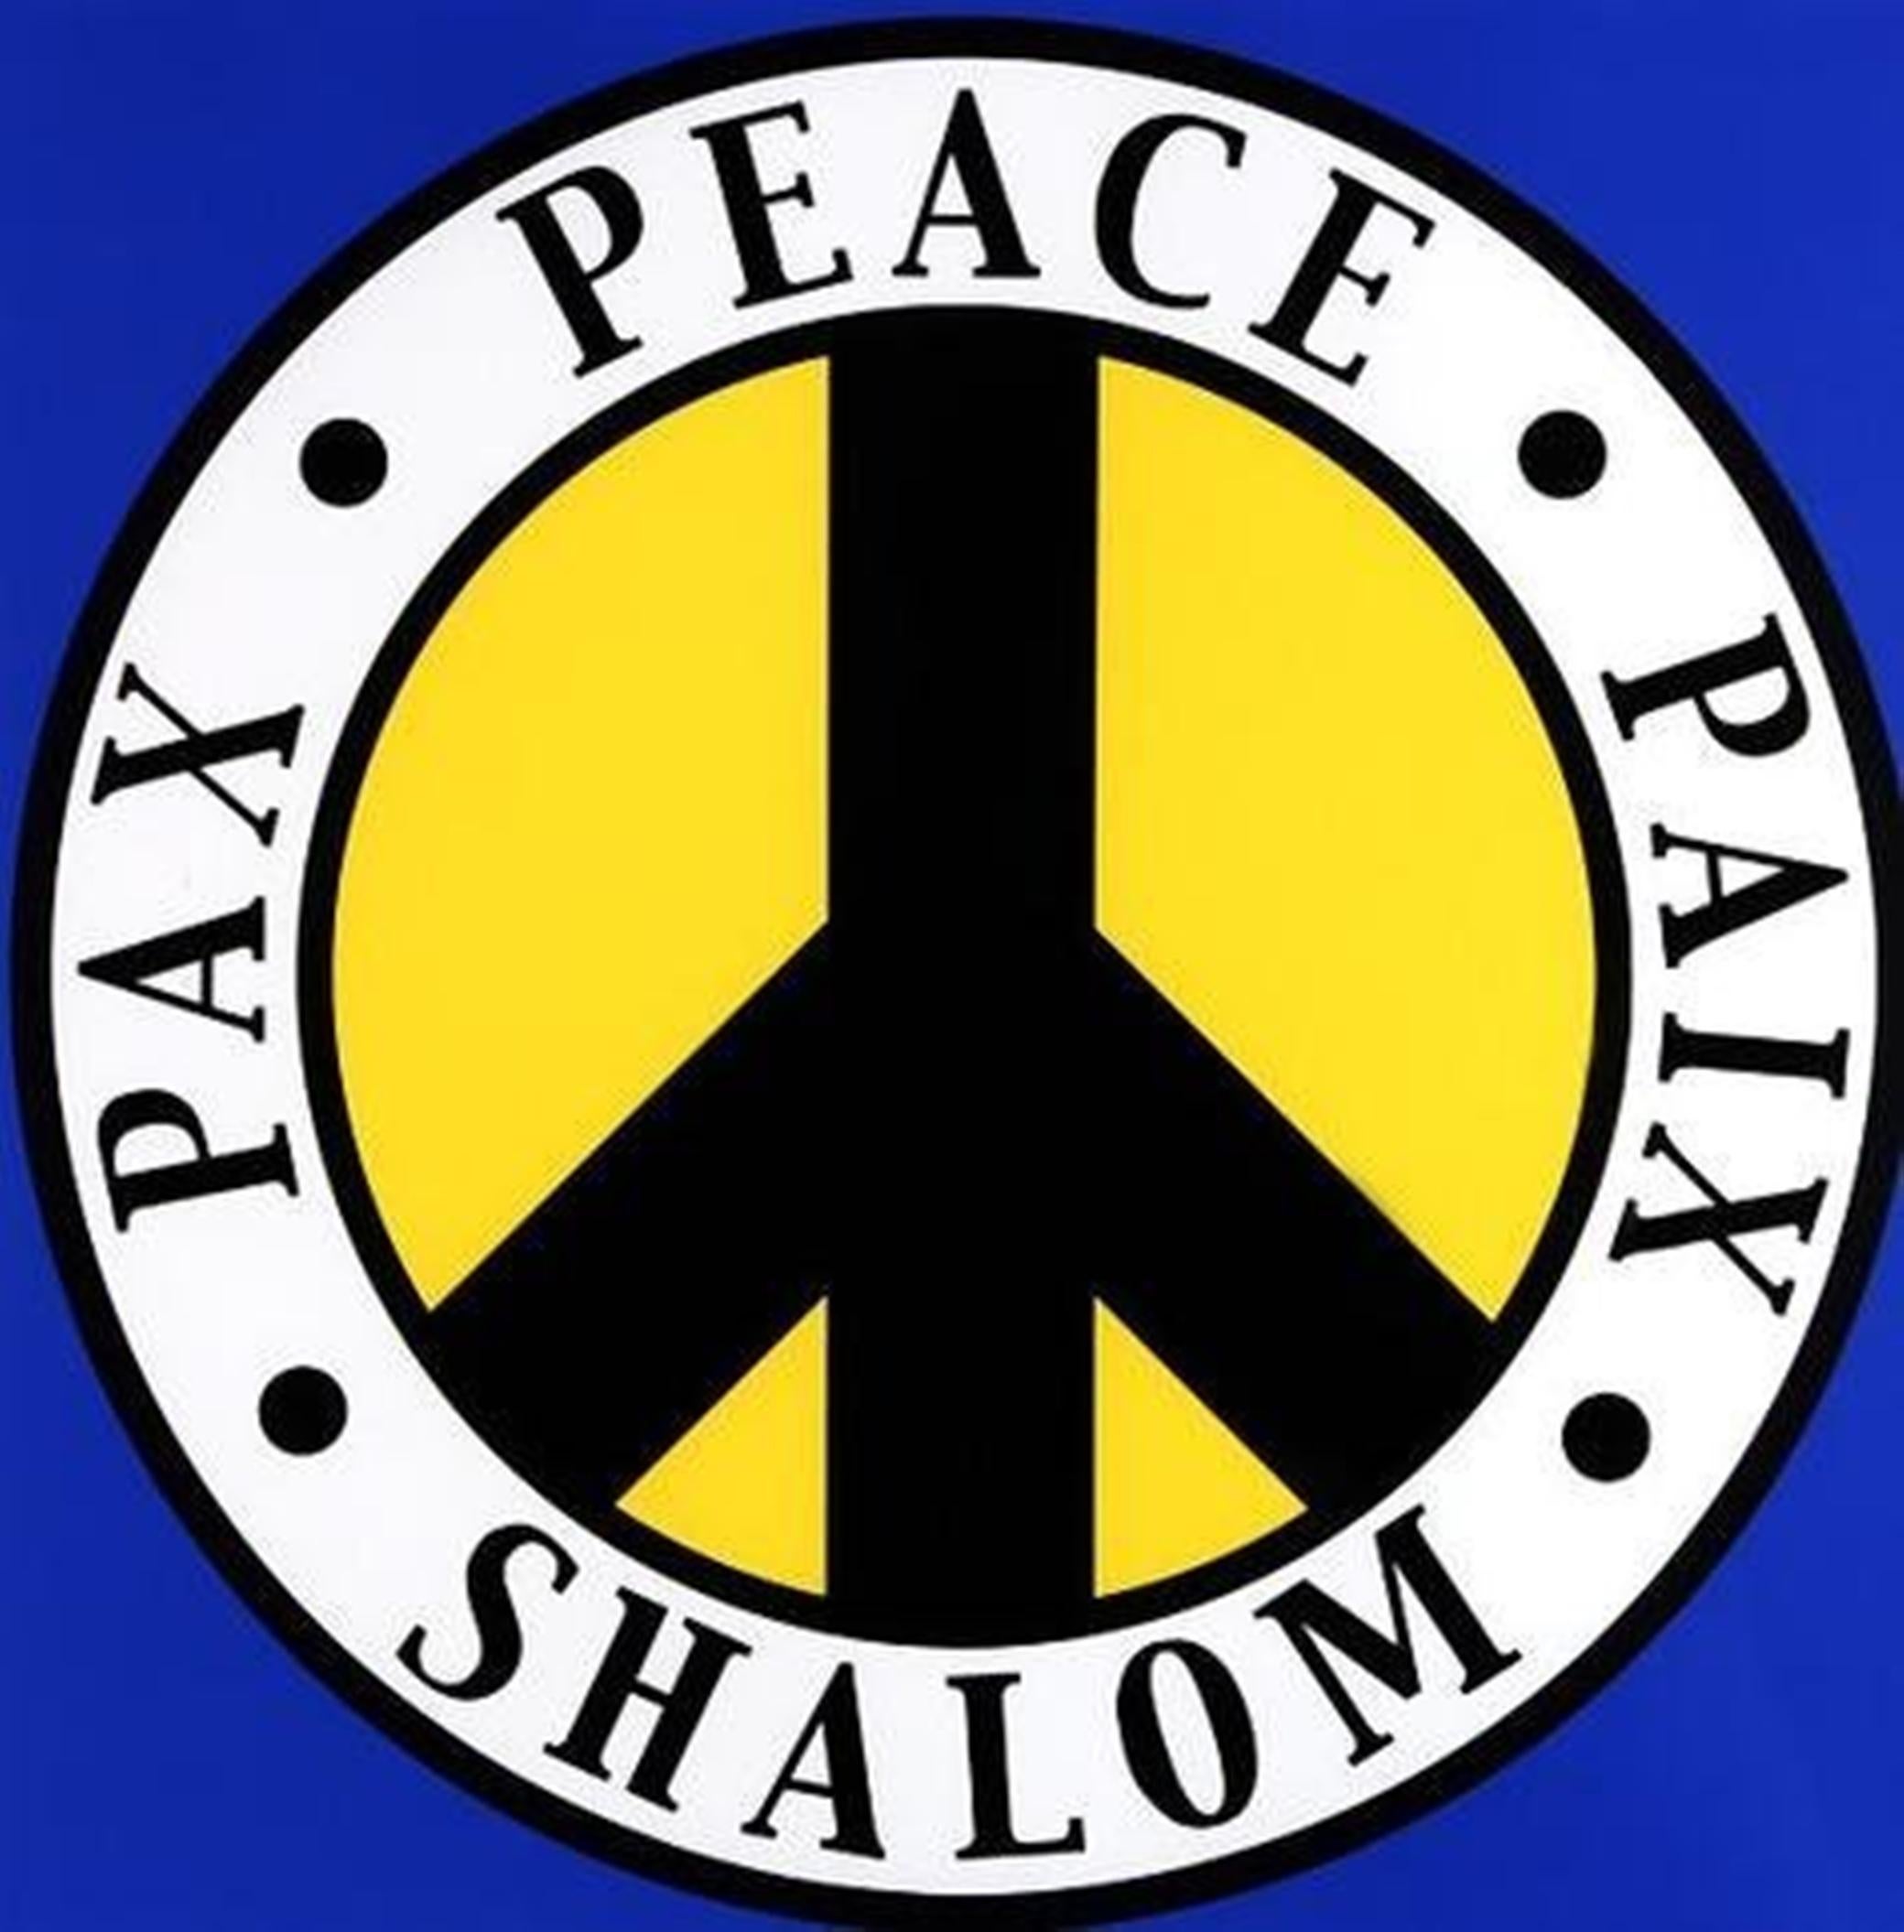 Robert Indiana Abstract Print - Shalom Pax Paix (The Peace Print) silkscreen on Rives BFK paper signed/N 35/50